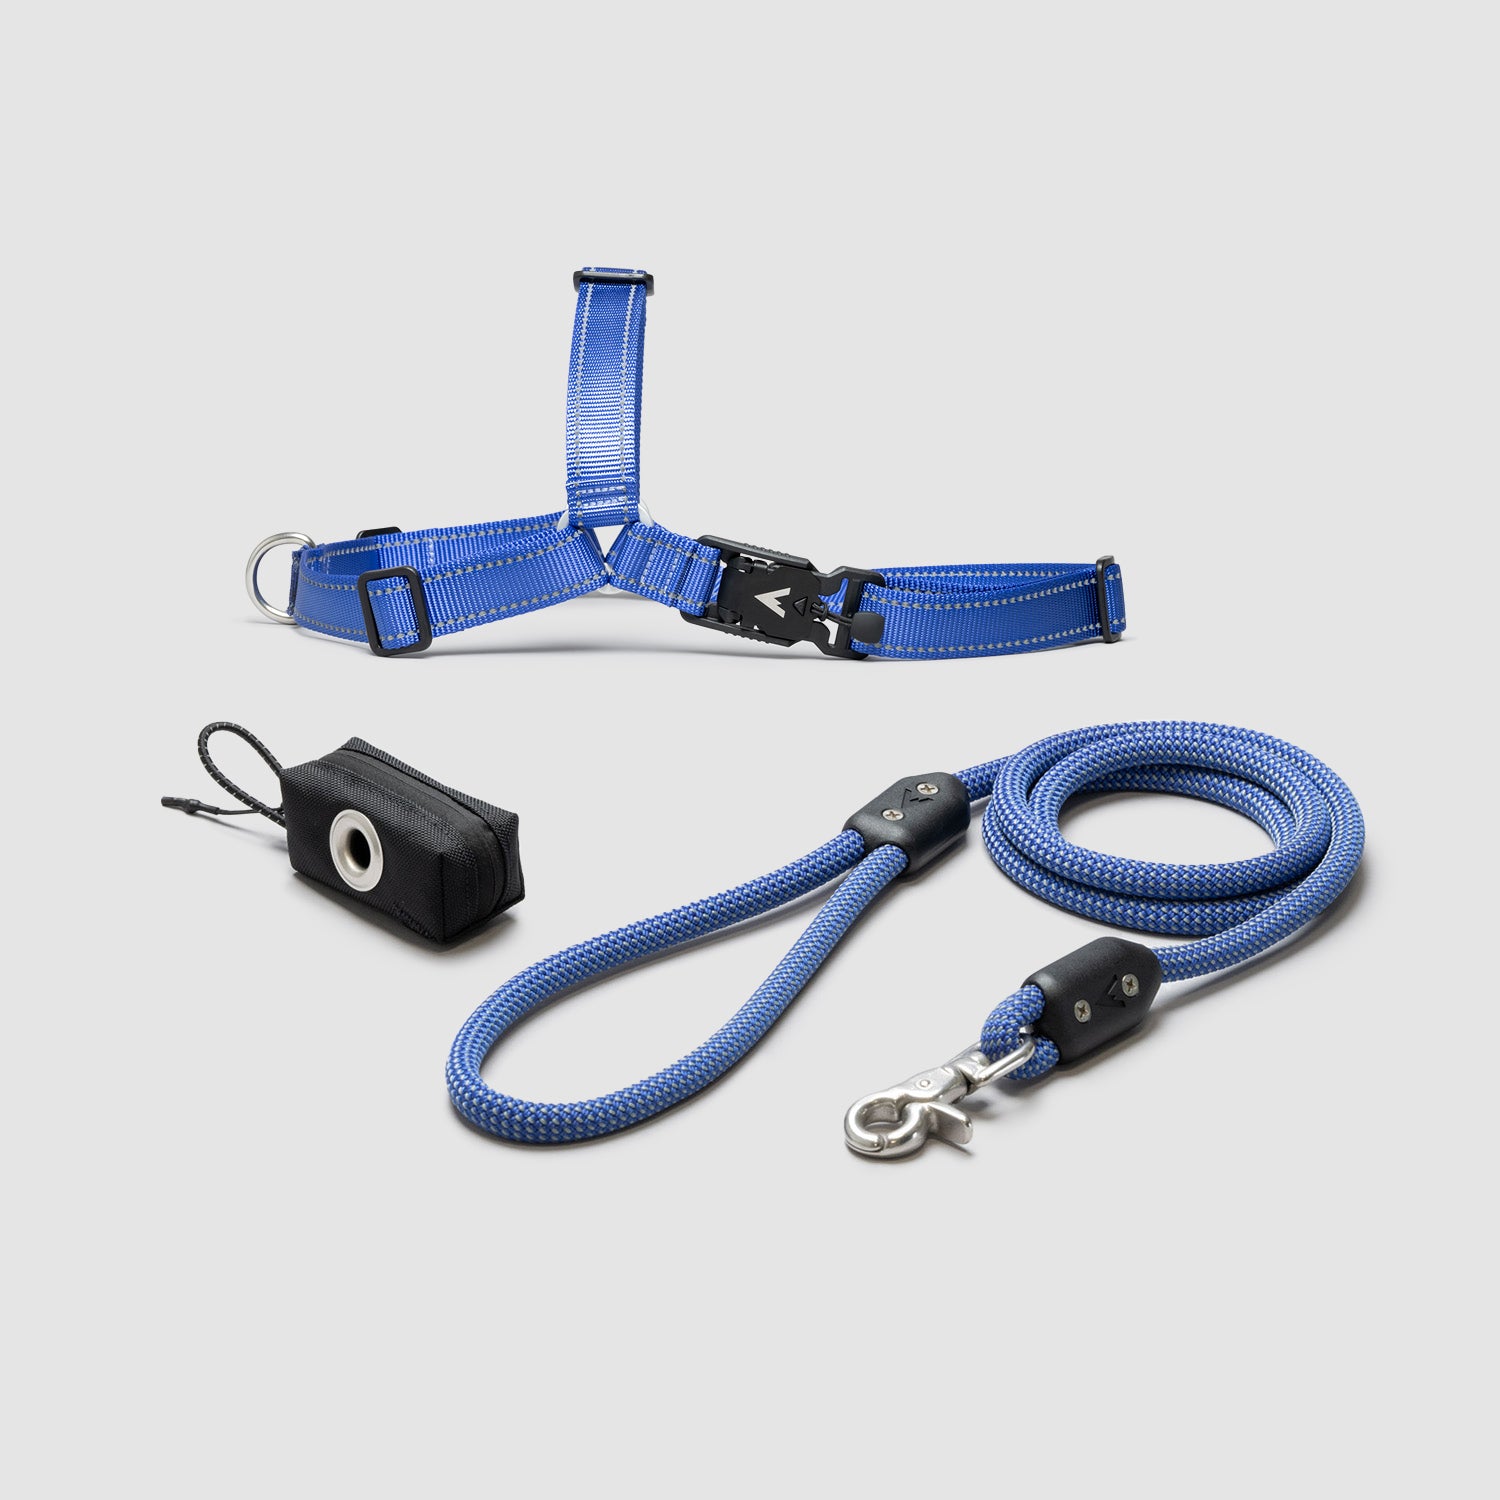 atlas pet company lifetime kit with leash harness and pouch handmade in colorado with lifetime warranty --twilight